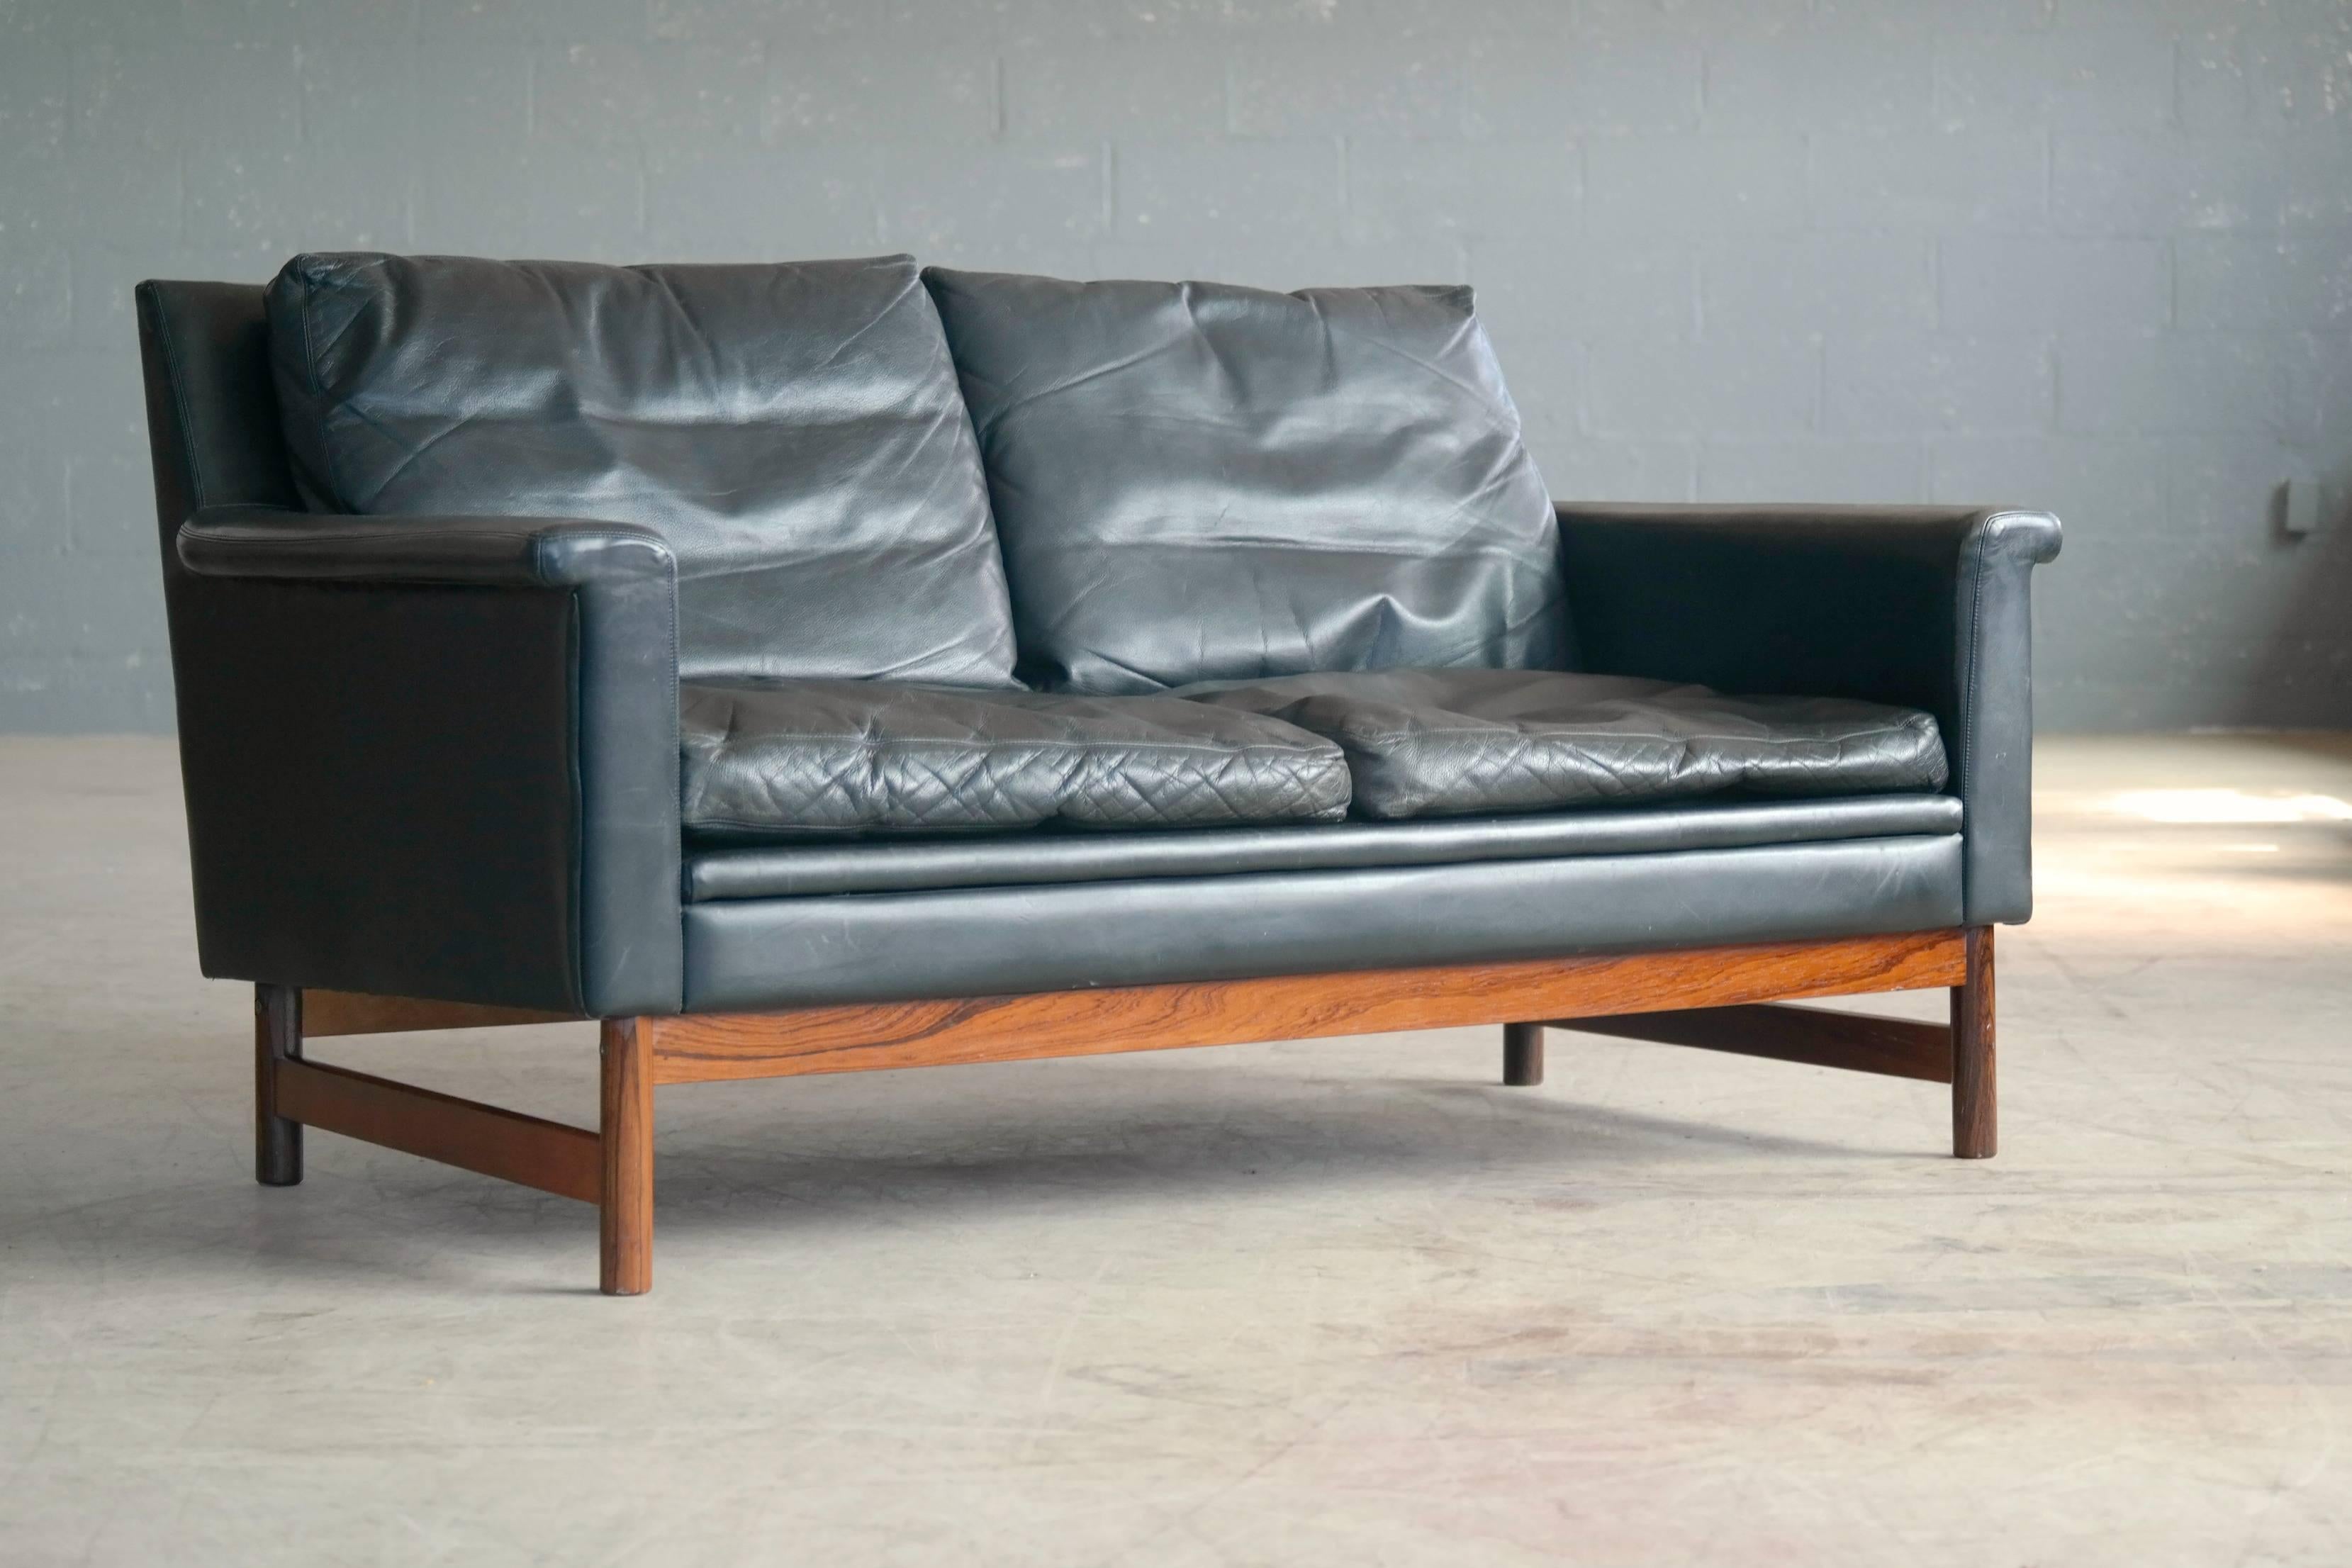 Scandinavian Modern Love Seat in Black Leather and Rosewood by Scapa of Sweden